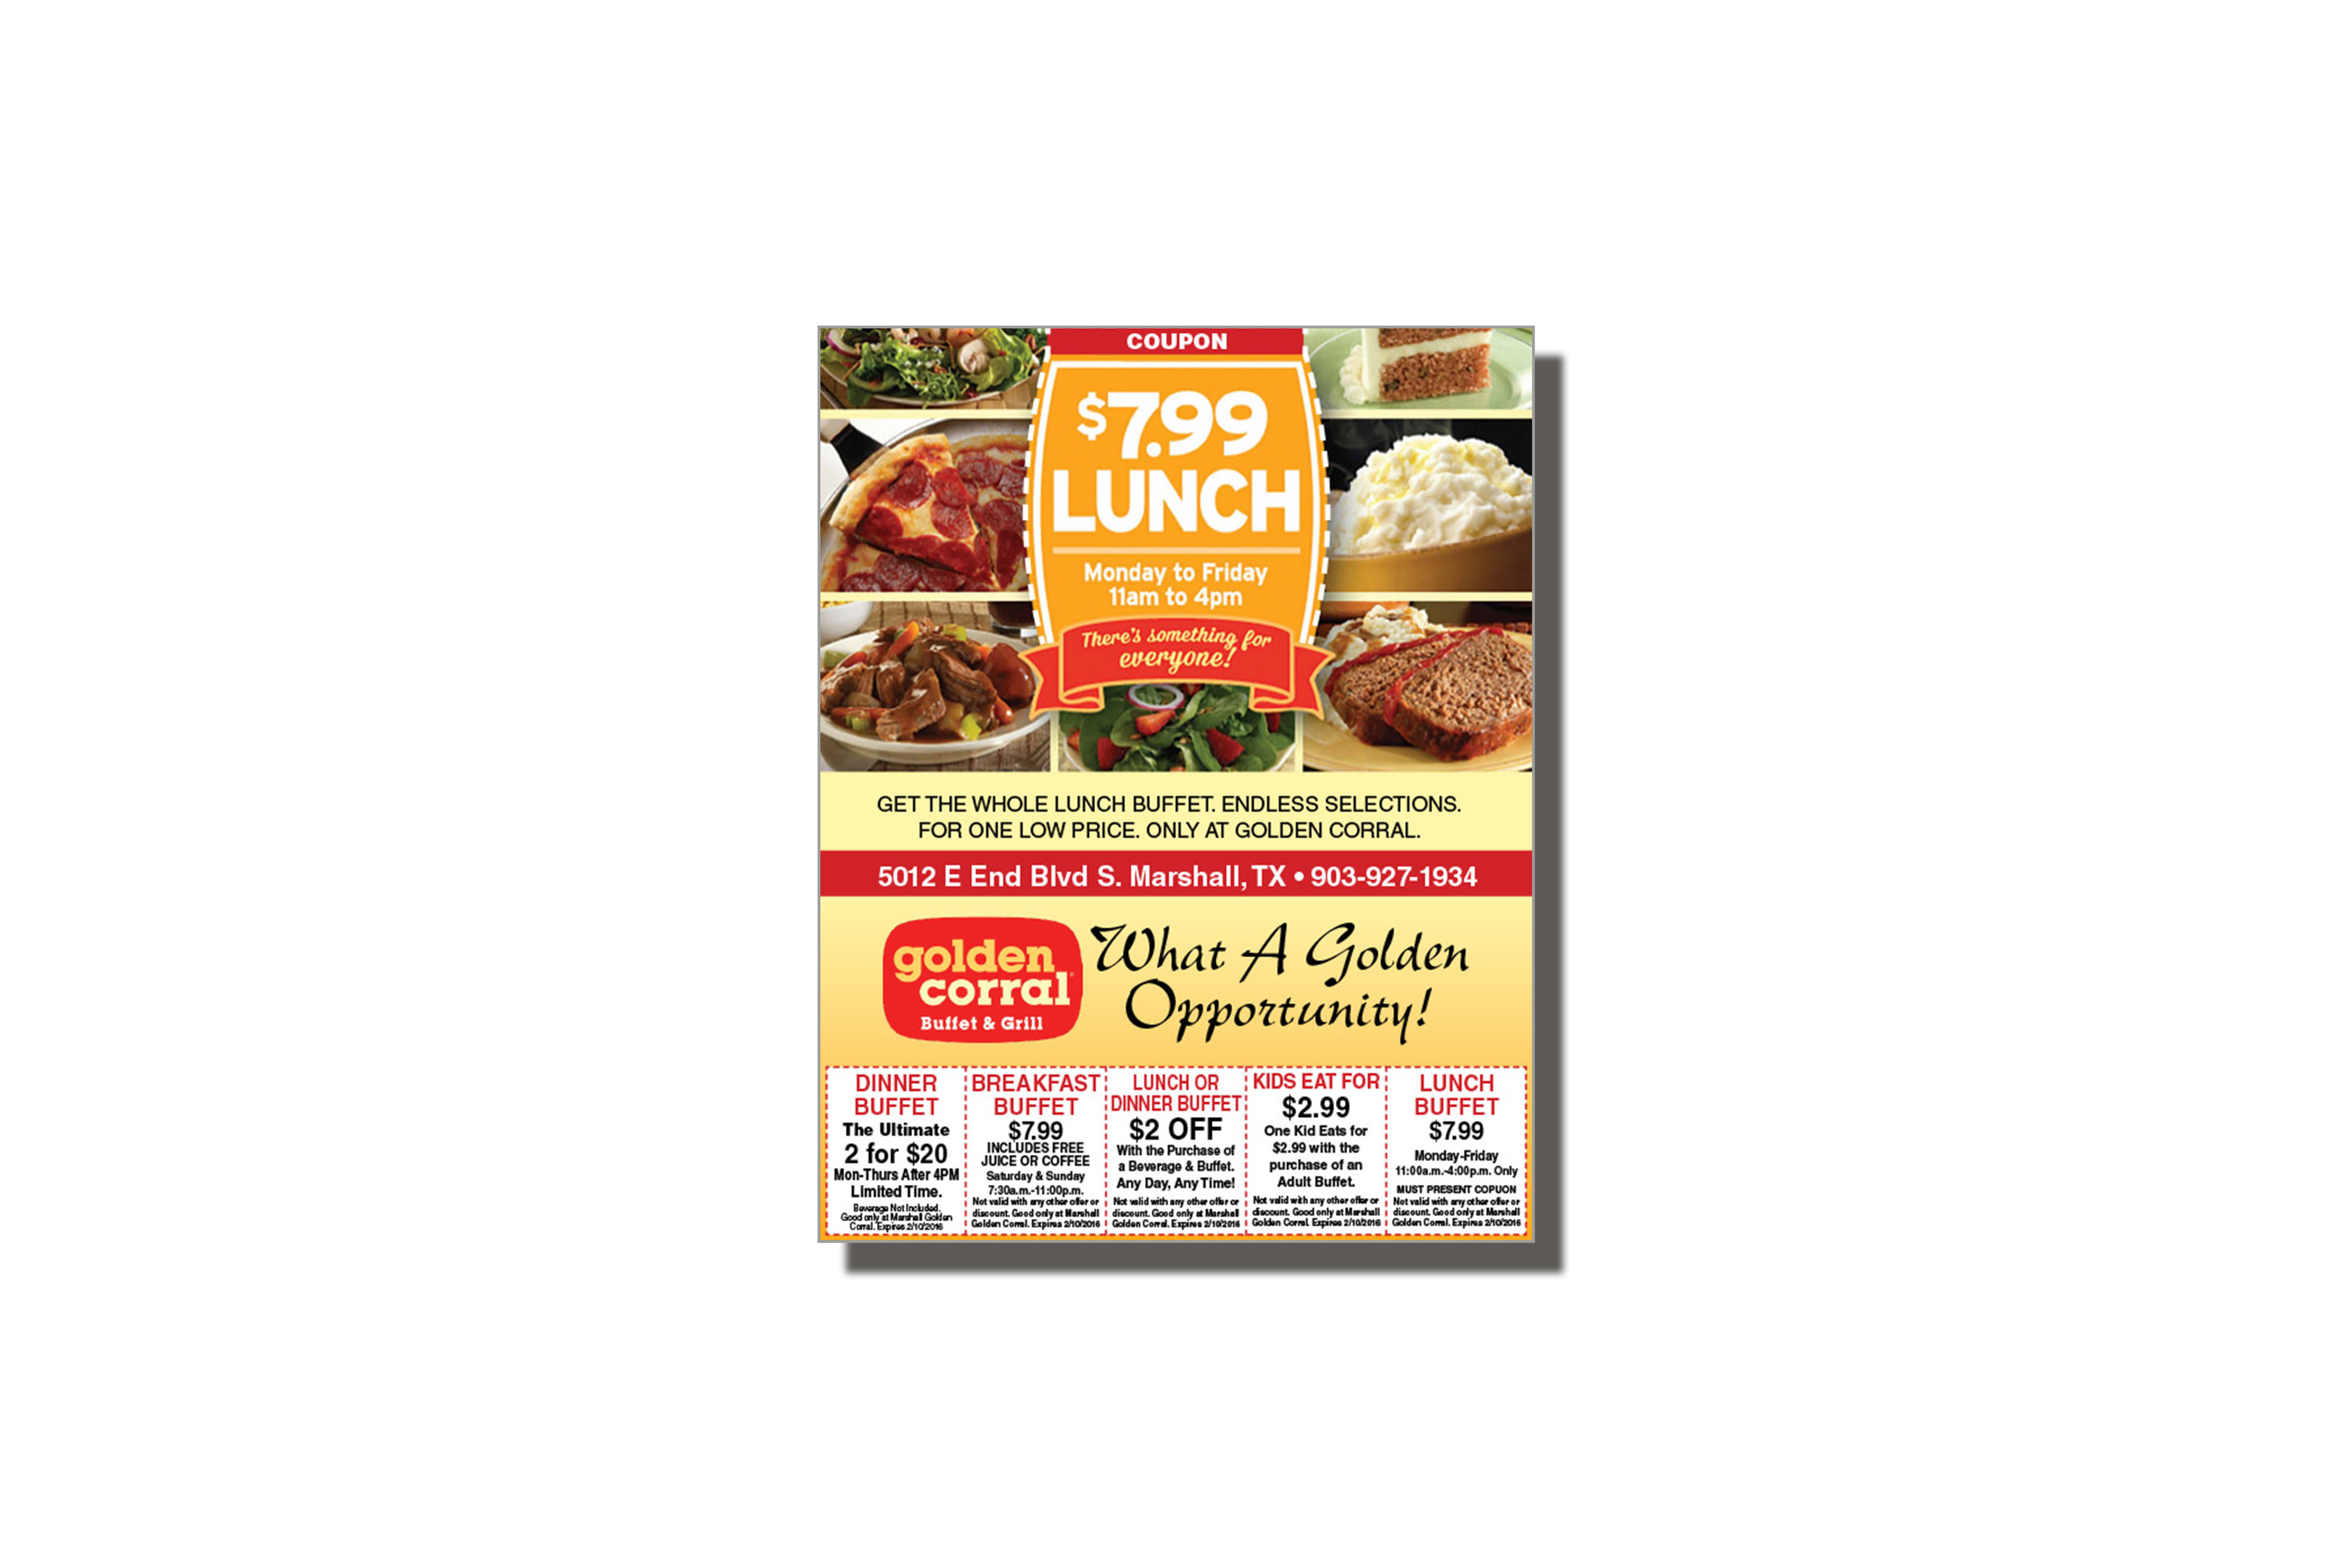 Golden Corral_Direct Mail Ads_Artboard Layout